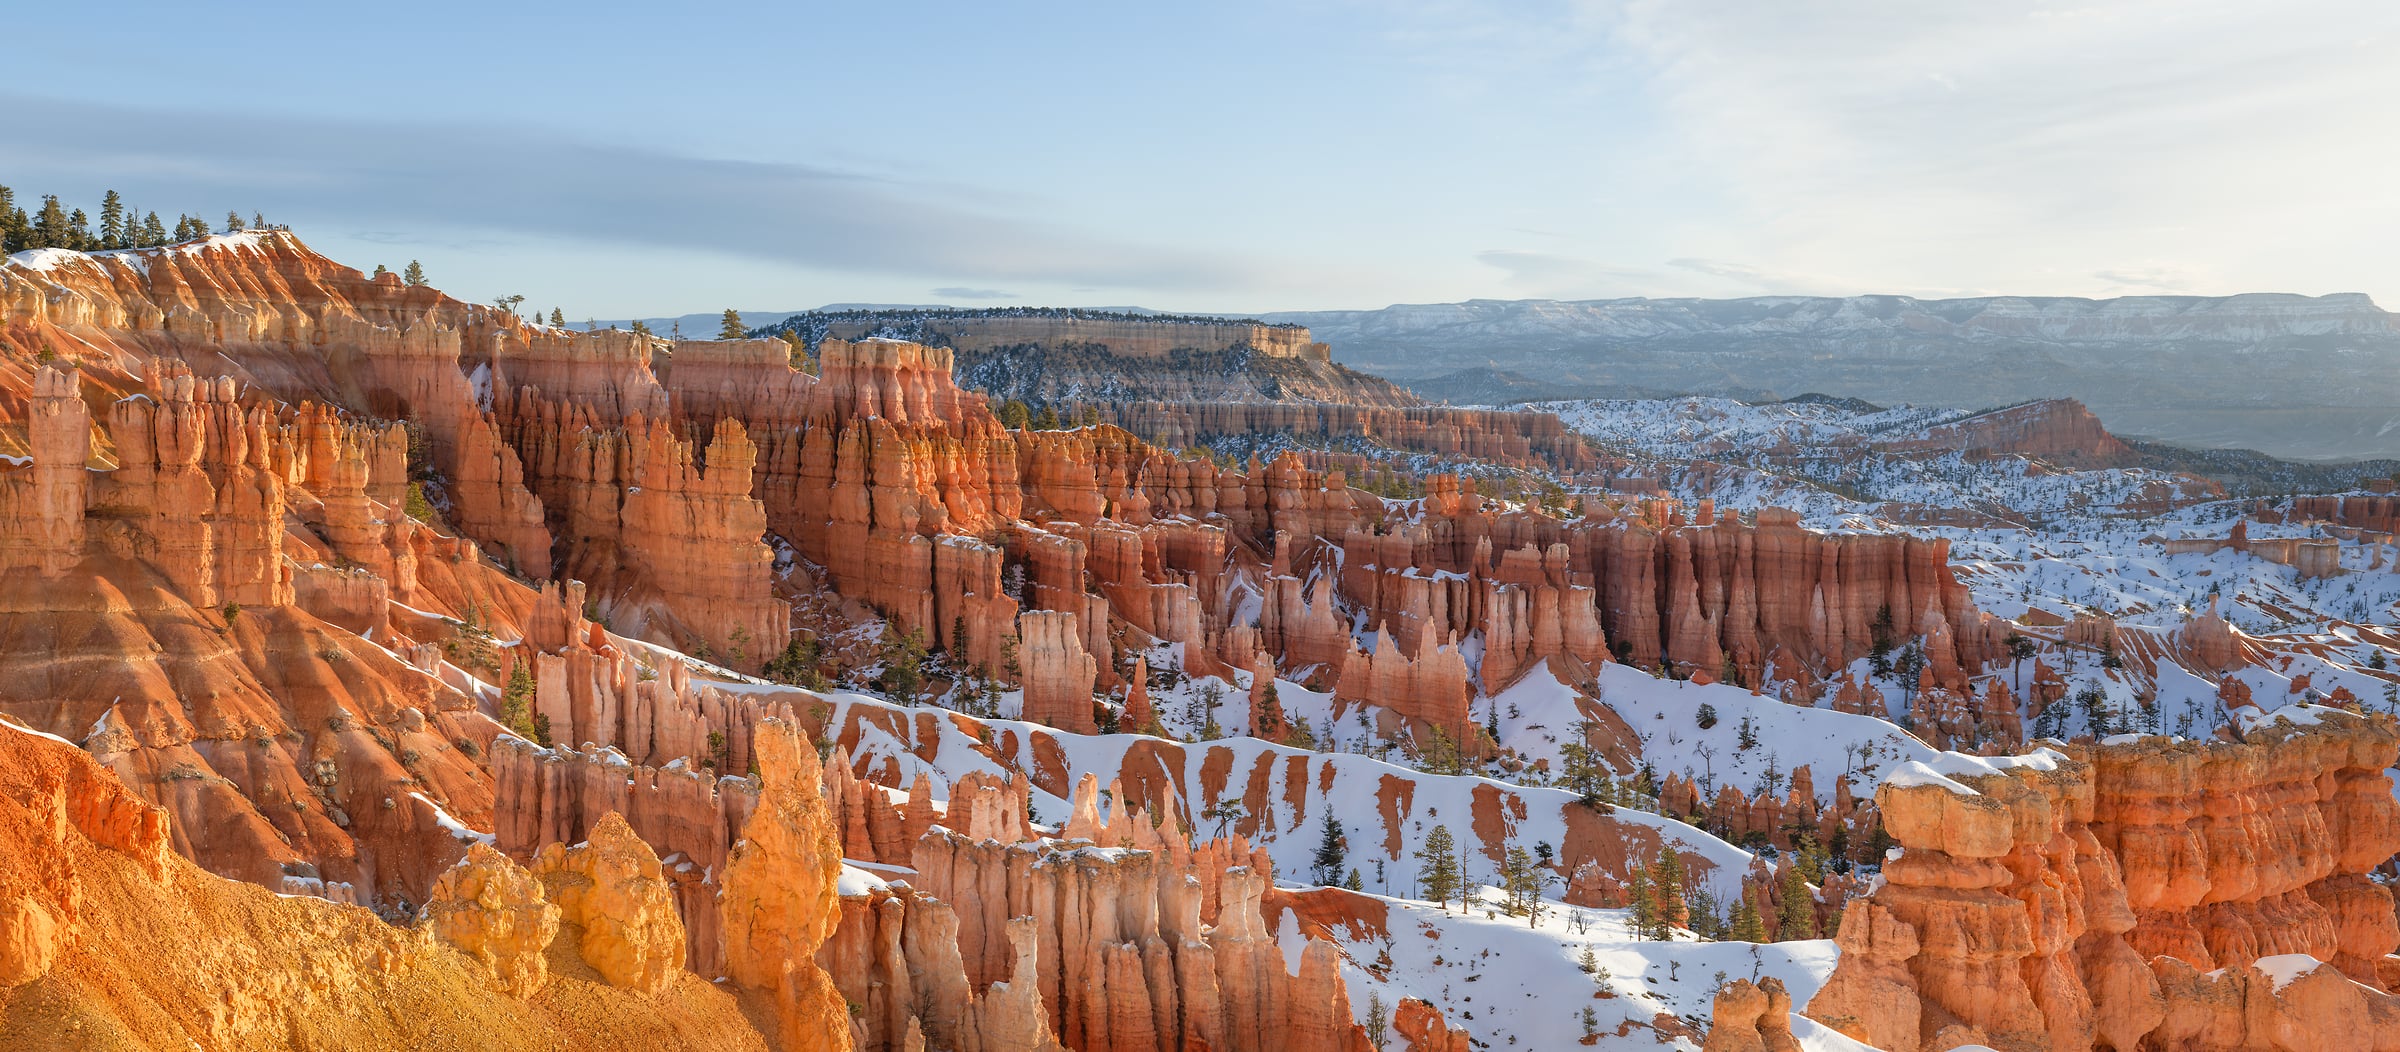 464 megapixels! A very high resolution, large-format VAST photo print of hoodoos at sunrise; landscape photograph created by Greg Probst in Bryce Canyon National Park.